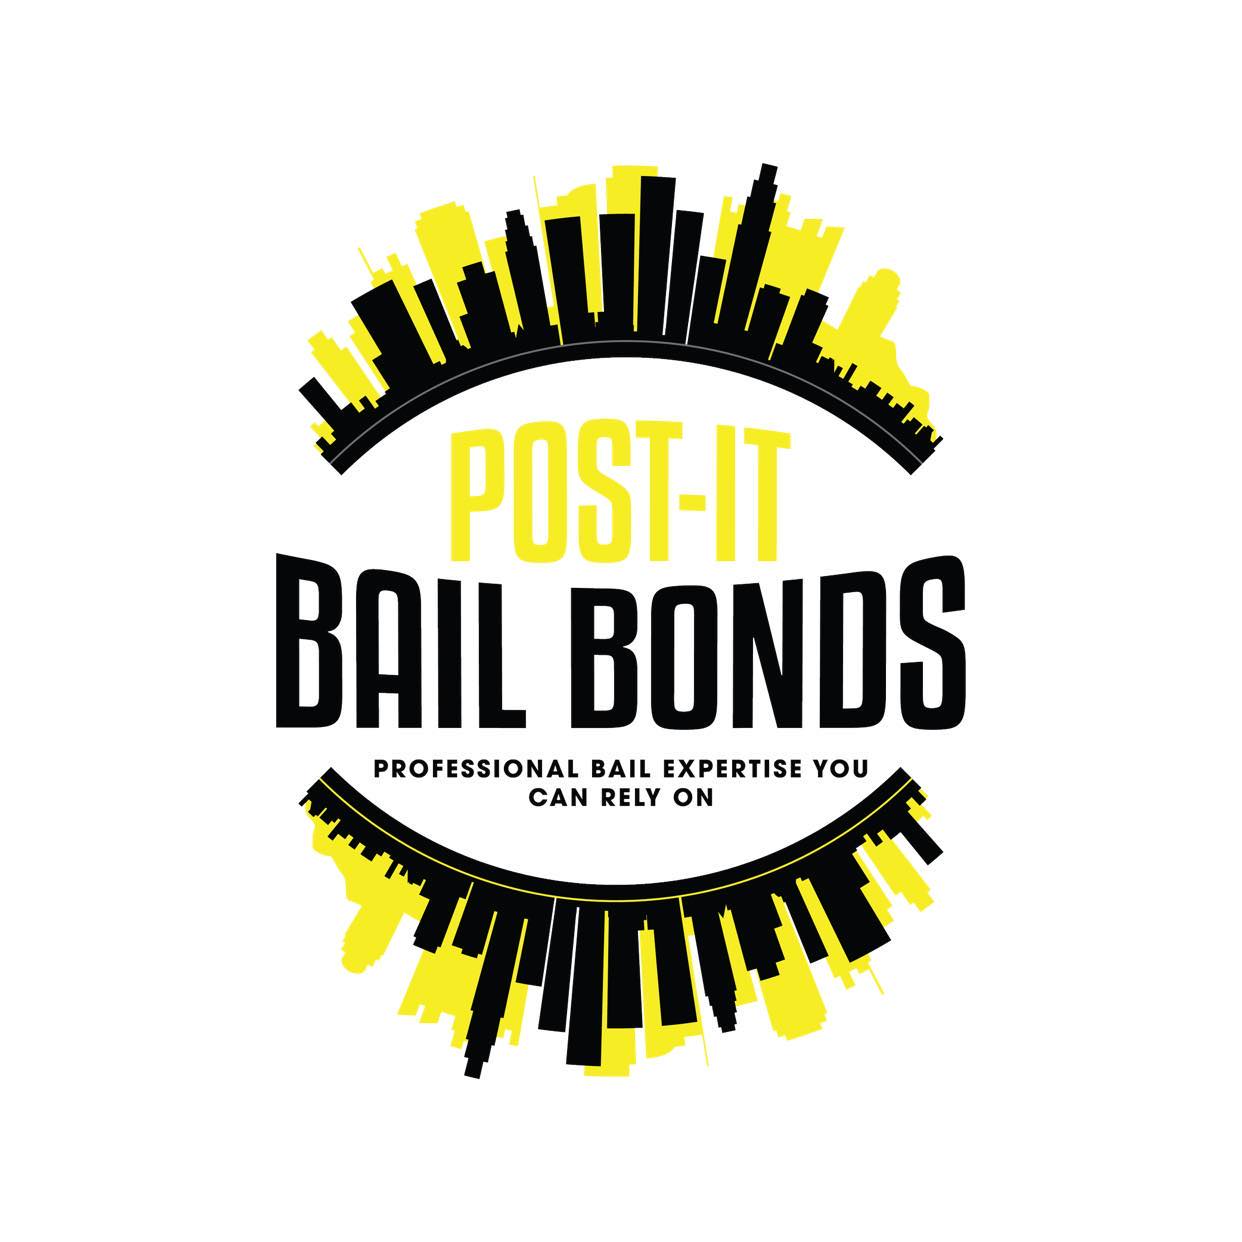 The Role of Riverside Bail Bonds in the Criminal Justice System